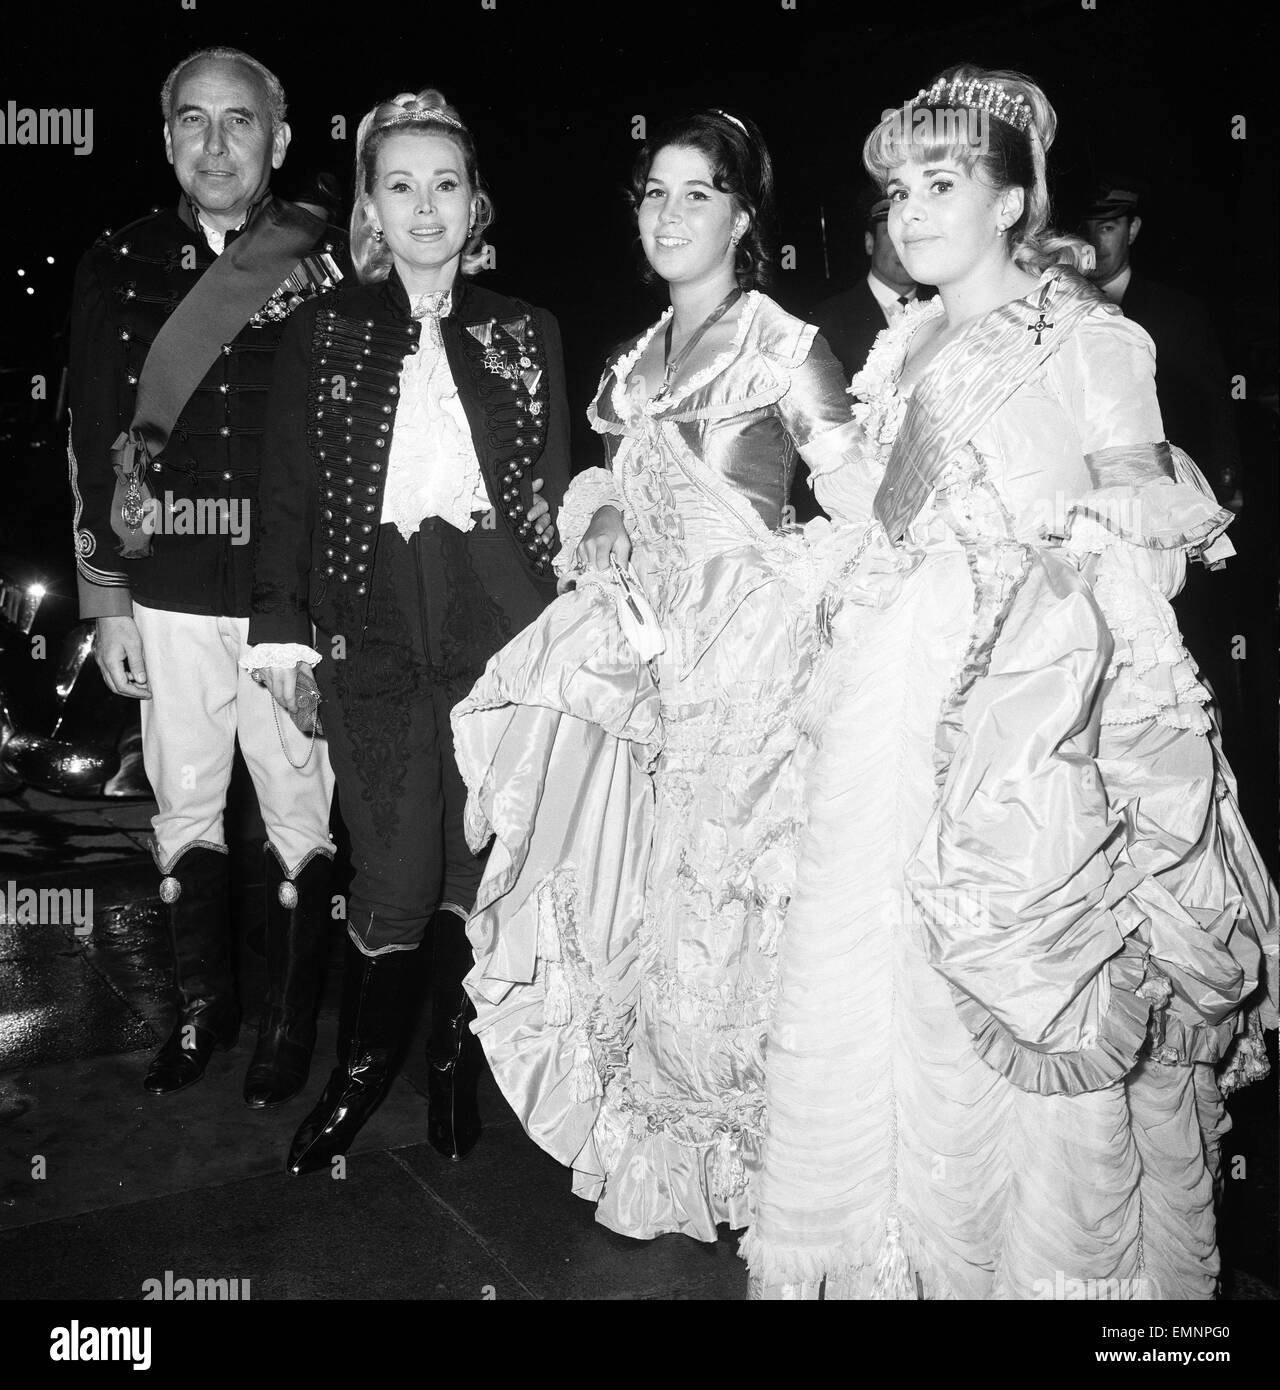 Actress Zsa Zsa Gabor holds a party this evening for over 200 guests at Les Ambassadeurs Club, Hamilton Place, London 9th July 1964. Pictured dressed in Hussar Uniform. Also pictured: husband Herbert Hunter & daughter Constance Hilton a.k.a. Francesca Hilton. Stock Photo